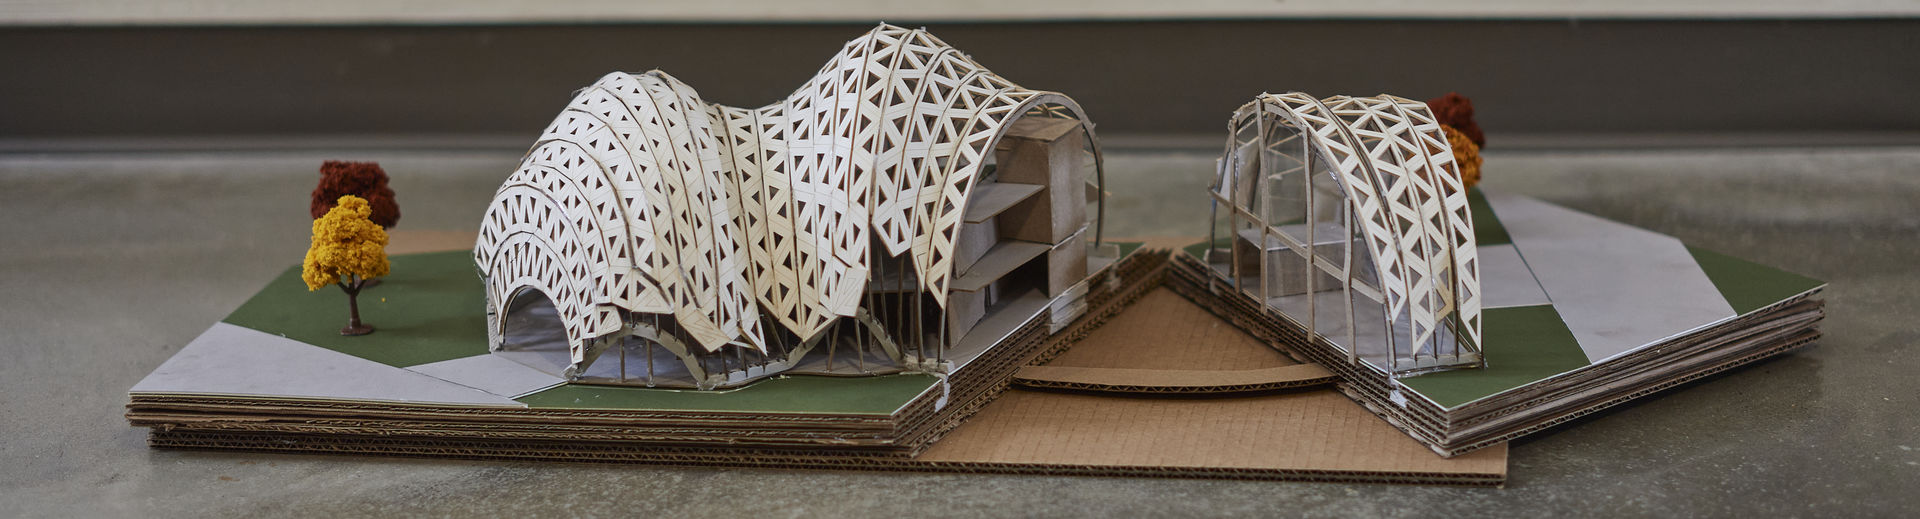 An architectural model of a structure with a curved roof is shown.